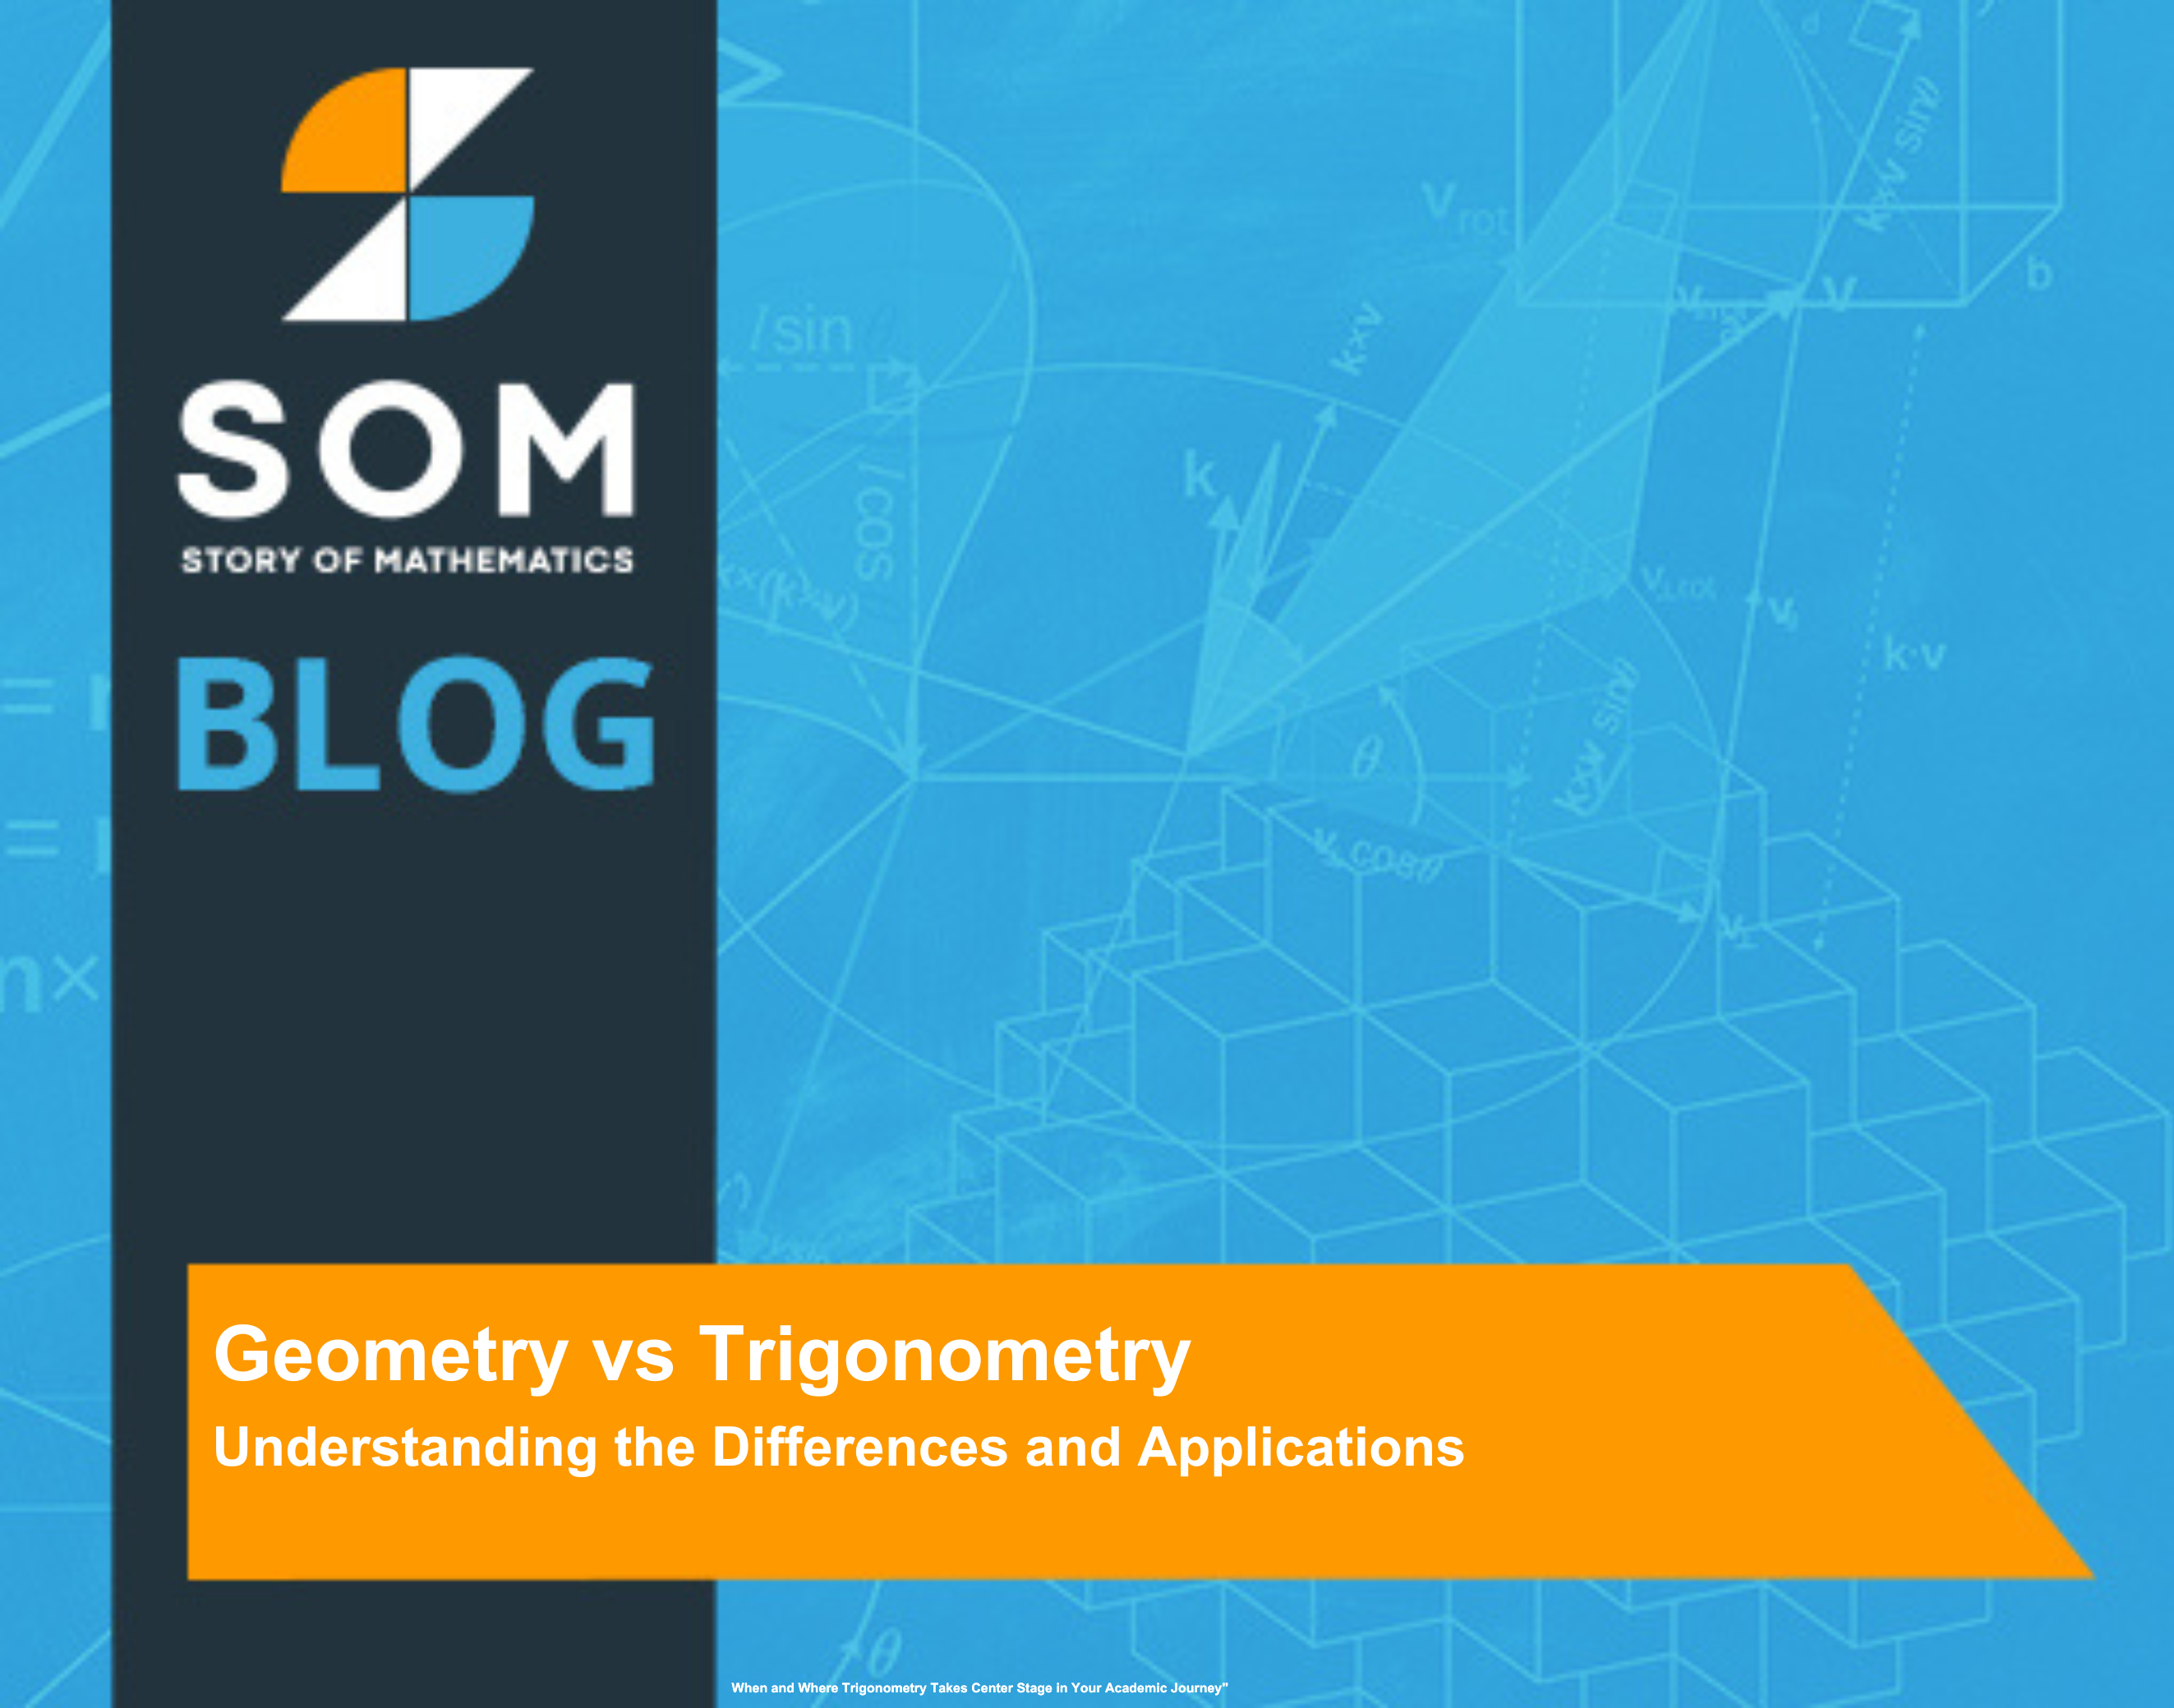 Feature Image Geometry vs Trigonometry Understanding the Differences and Applications